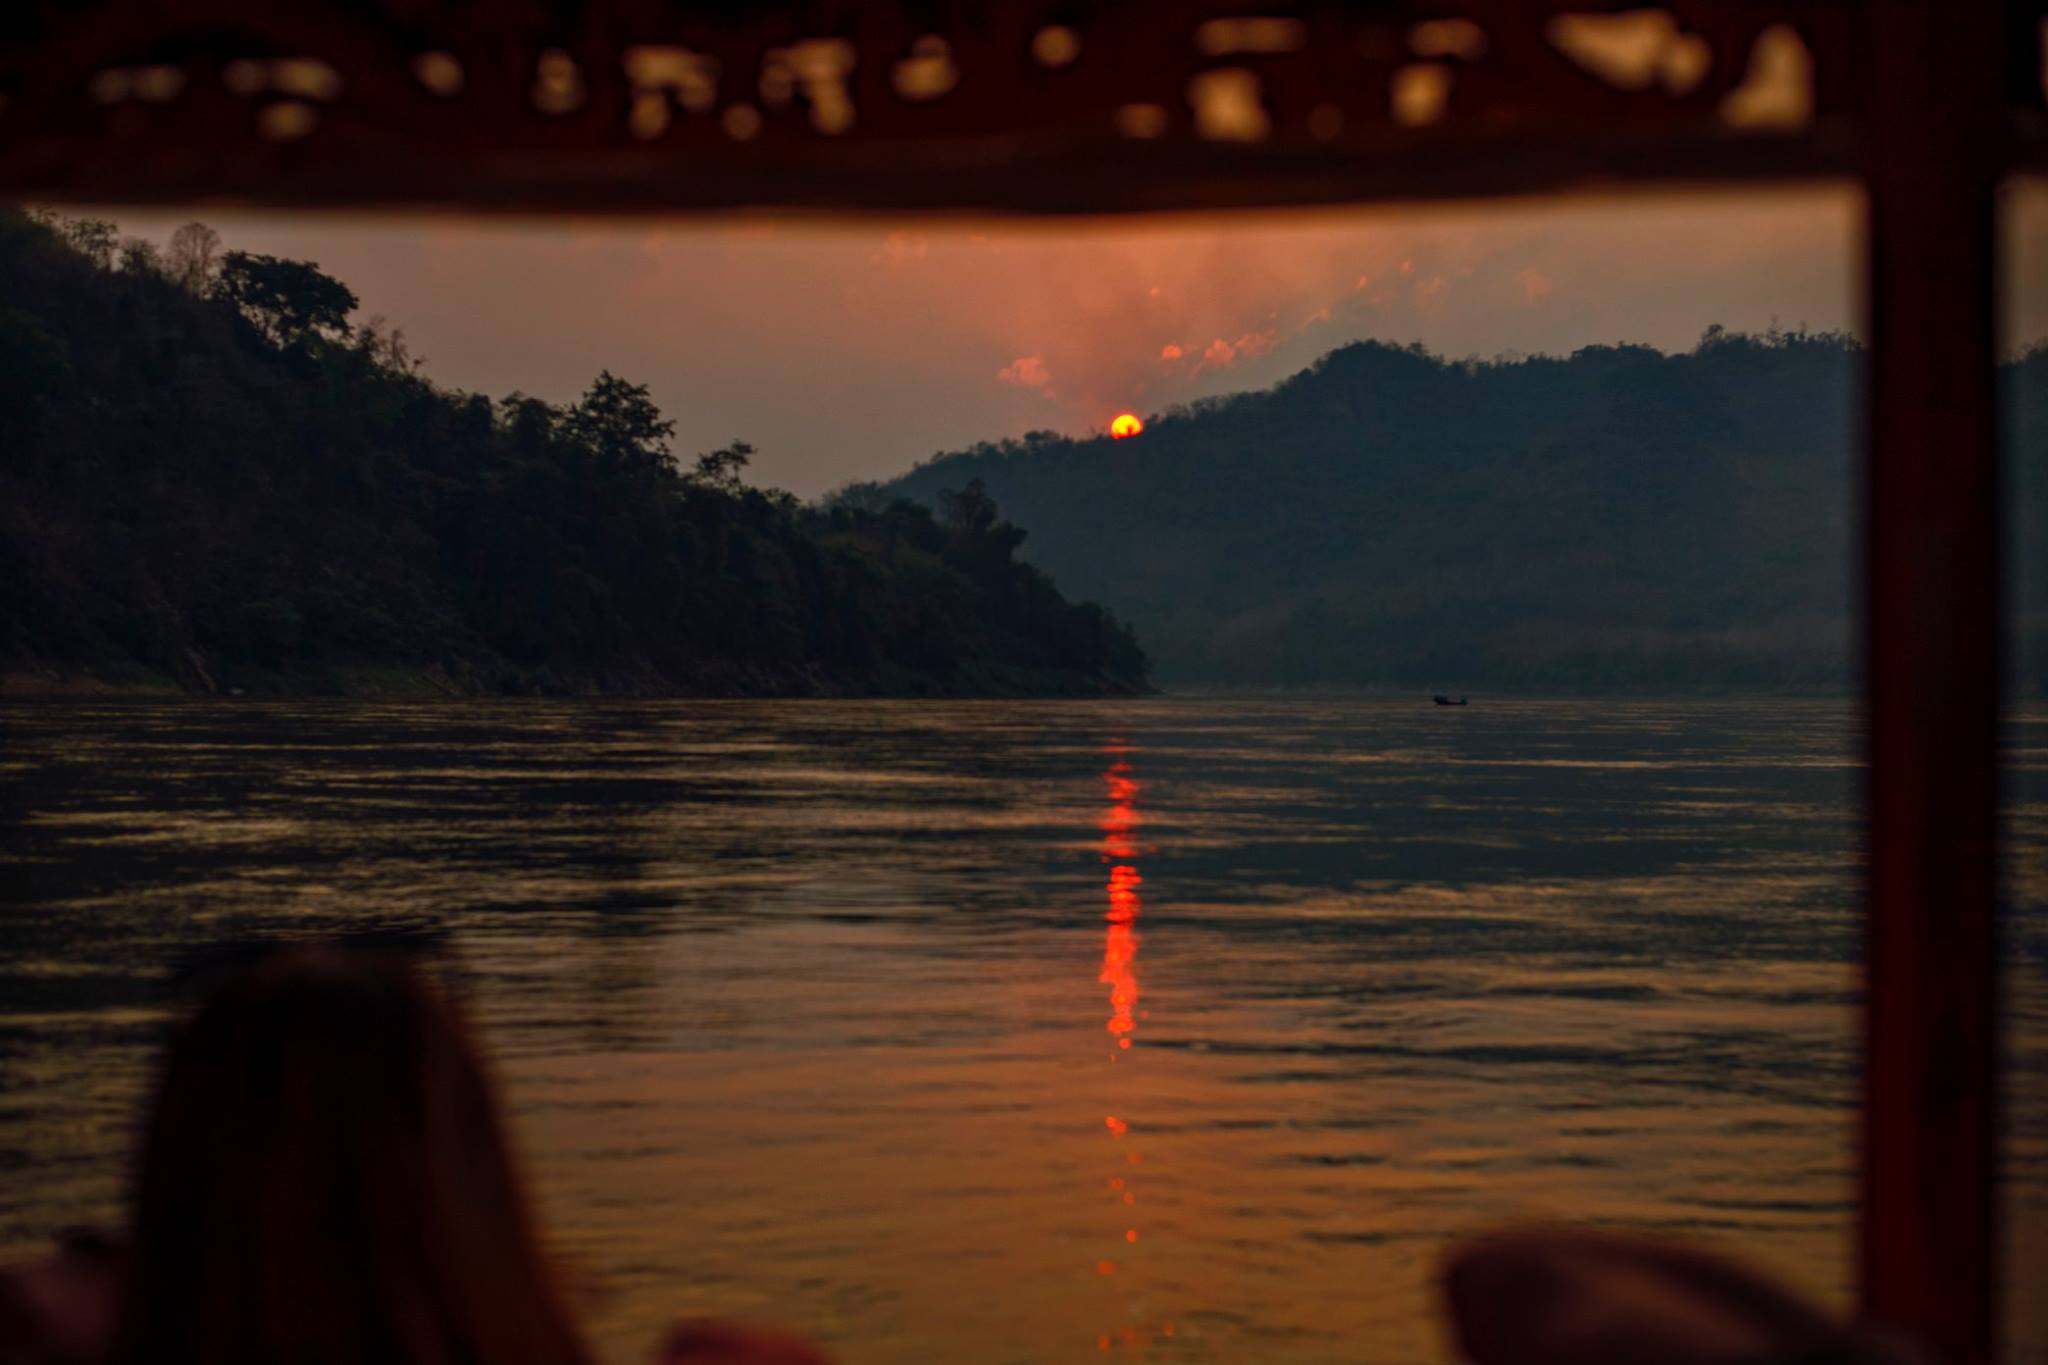 Sunset on the Mekong riverfront